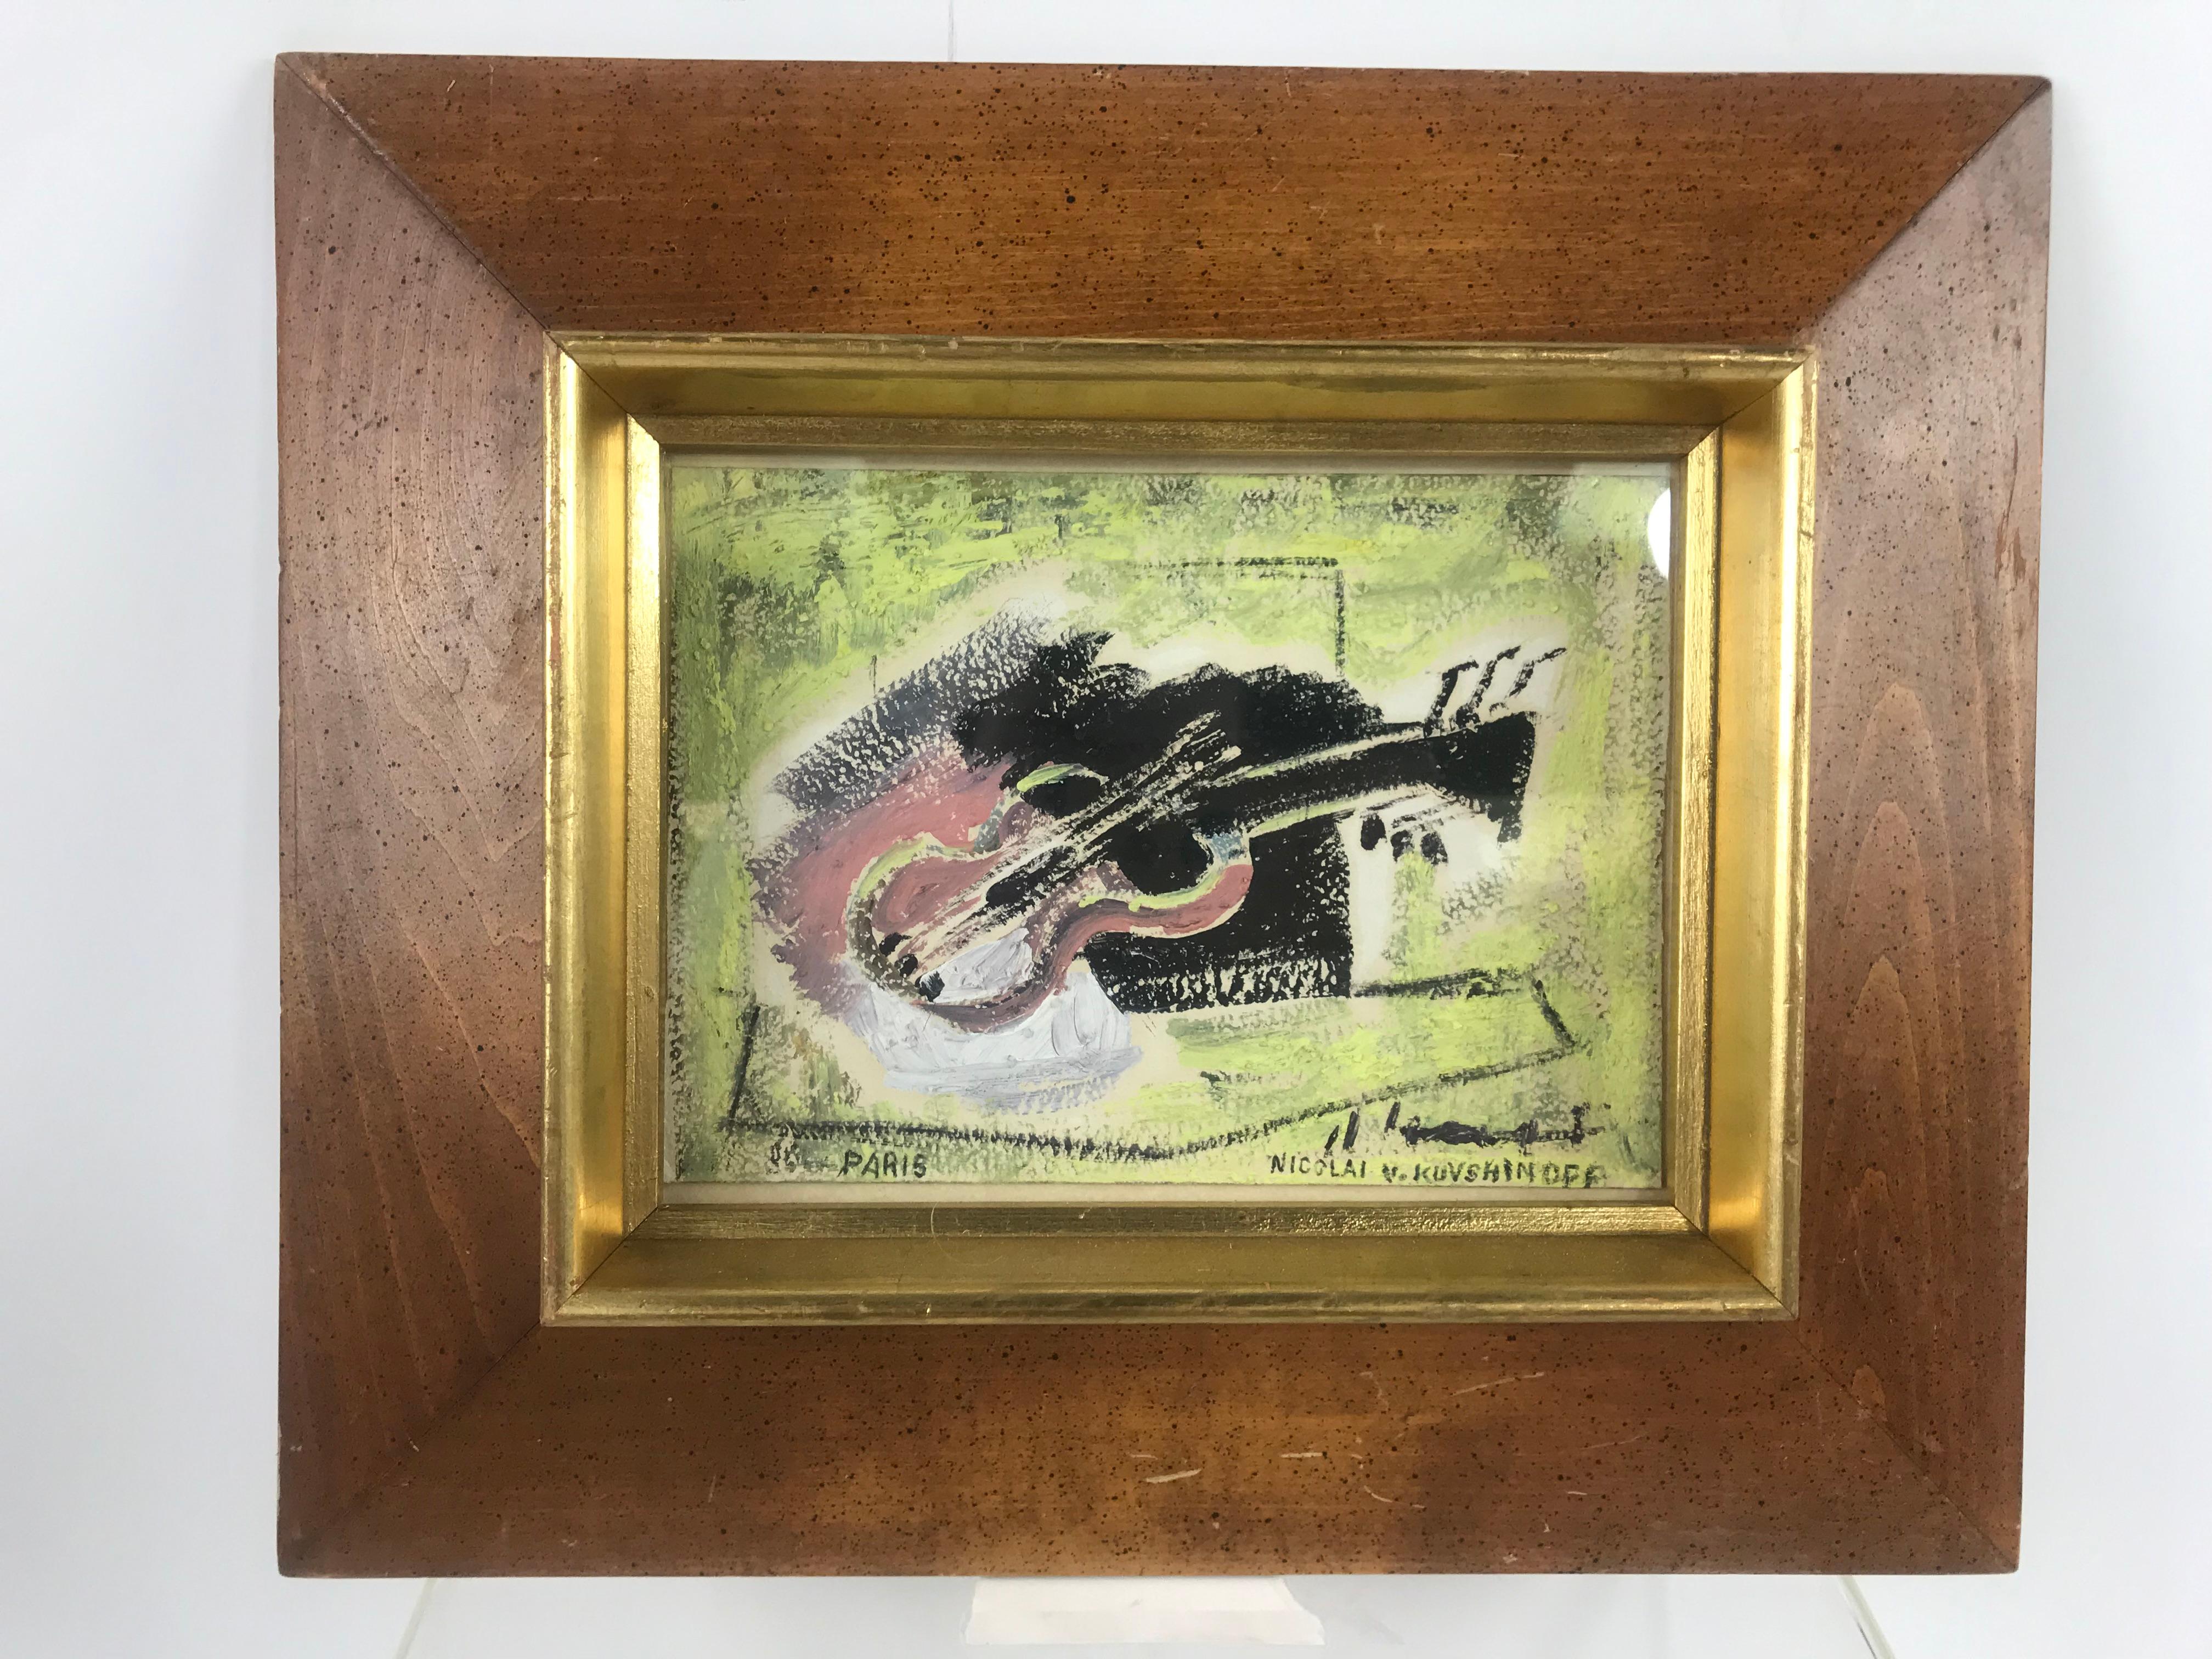 Nicolai Kuvshinoff, (1899-1997) signed lower right and on reverse. Beautifully framed.

Kuvshinoff was long-time artist in Seattle with a painting style called neo-cubist, Nicolai Kuvshinoff created abstract, bold works that reminded some viewers